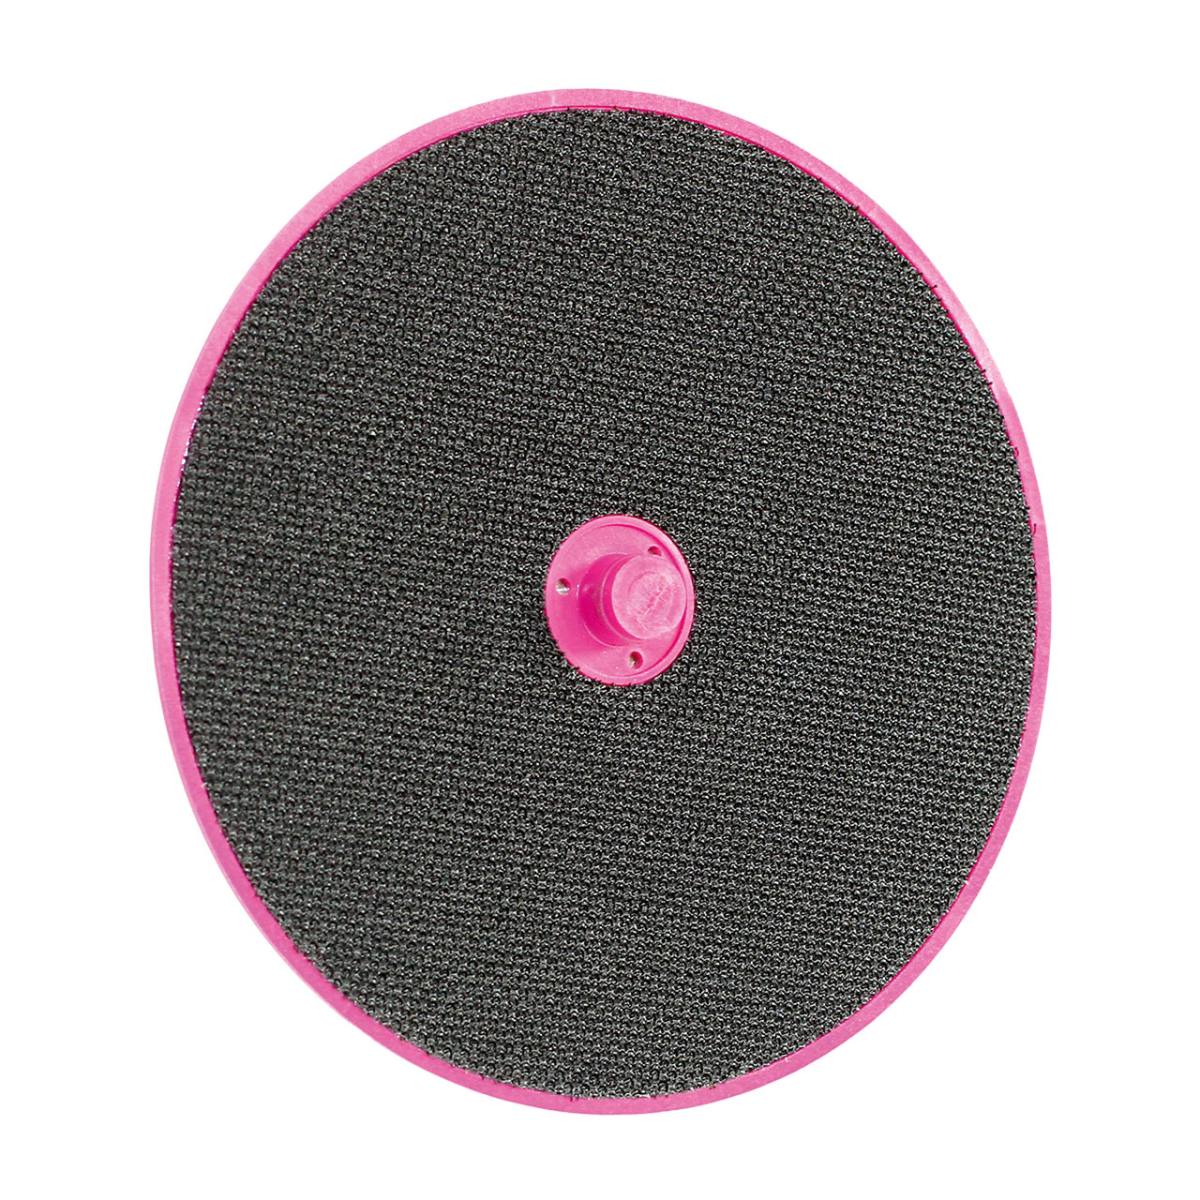 FIX KLETT special backing pad, 110 mm, M14, Velcro, centre centring